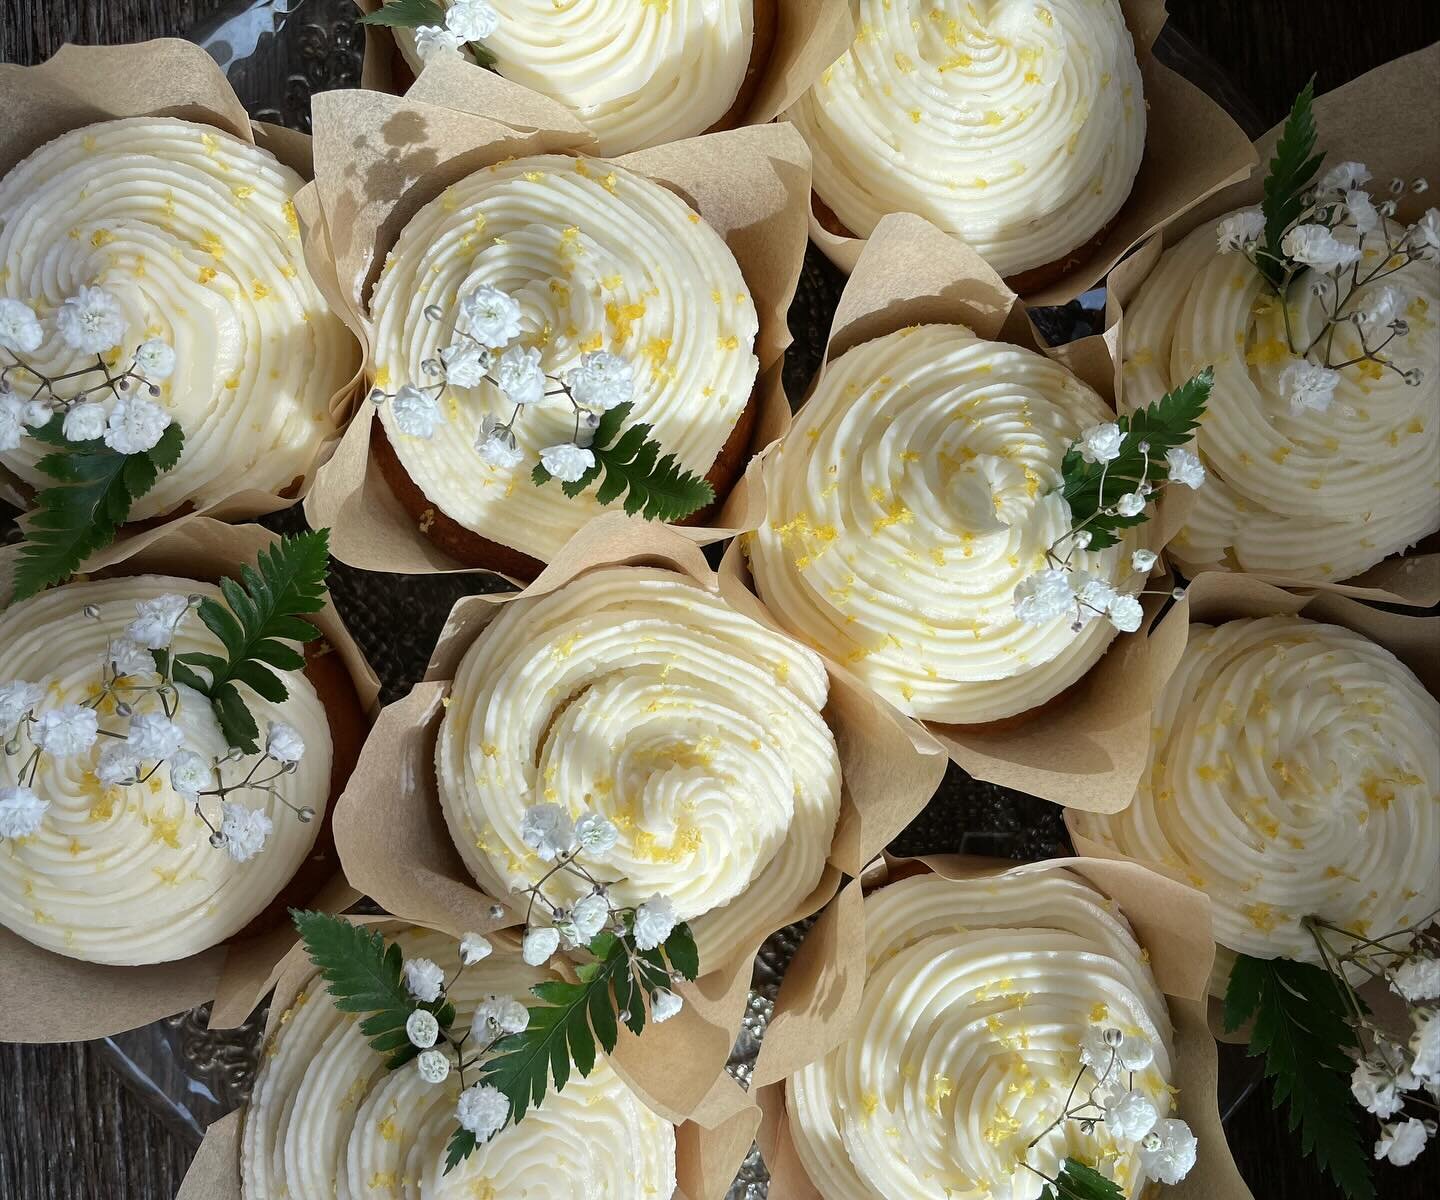 Lemon Curd Cupcakes are still available to order for your Easter brunch!